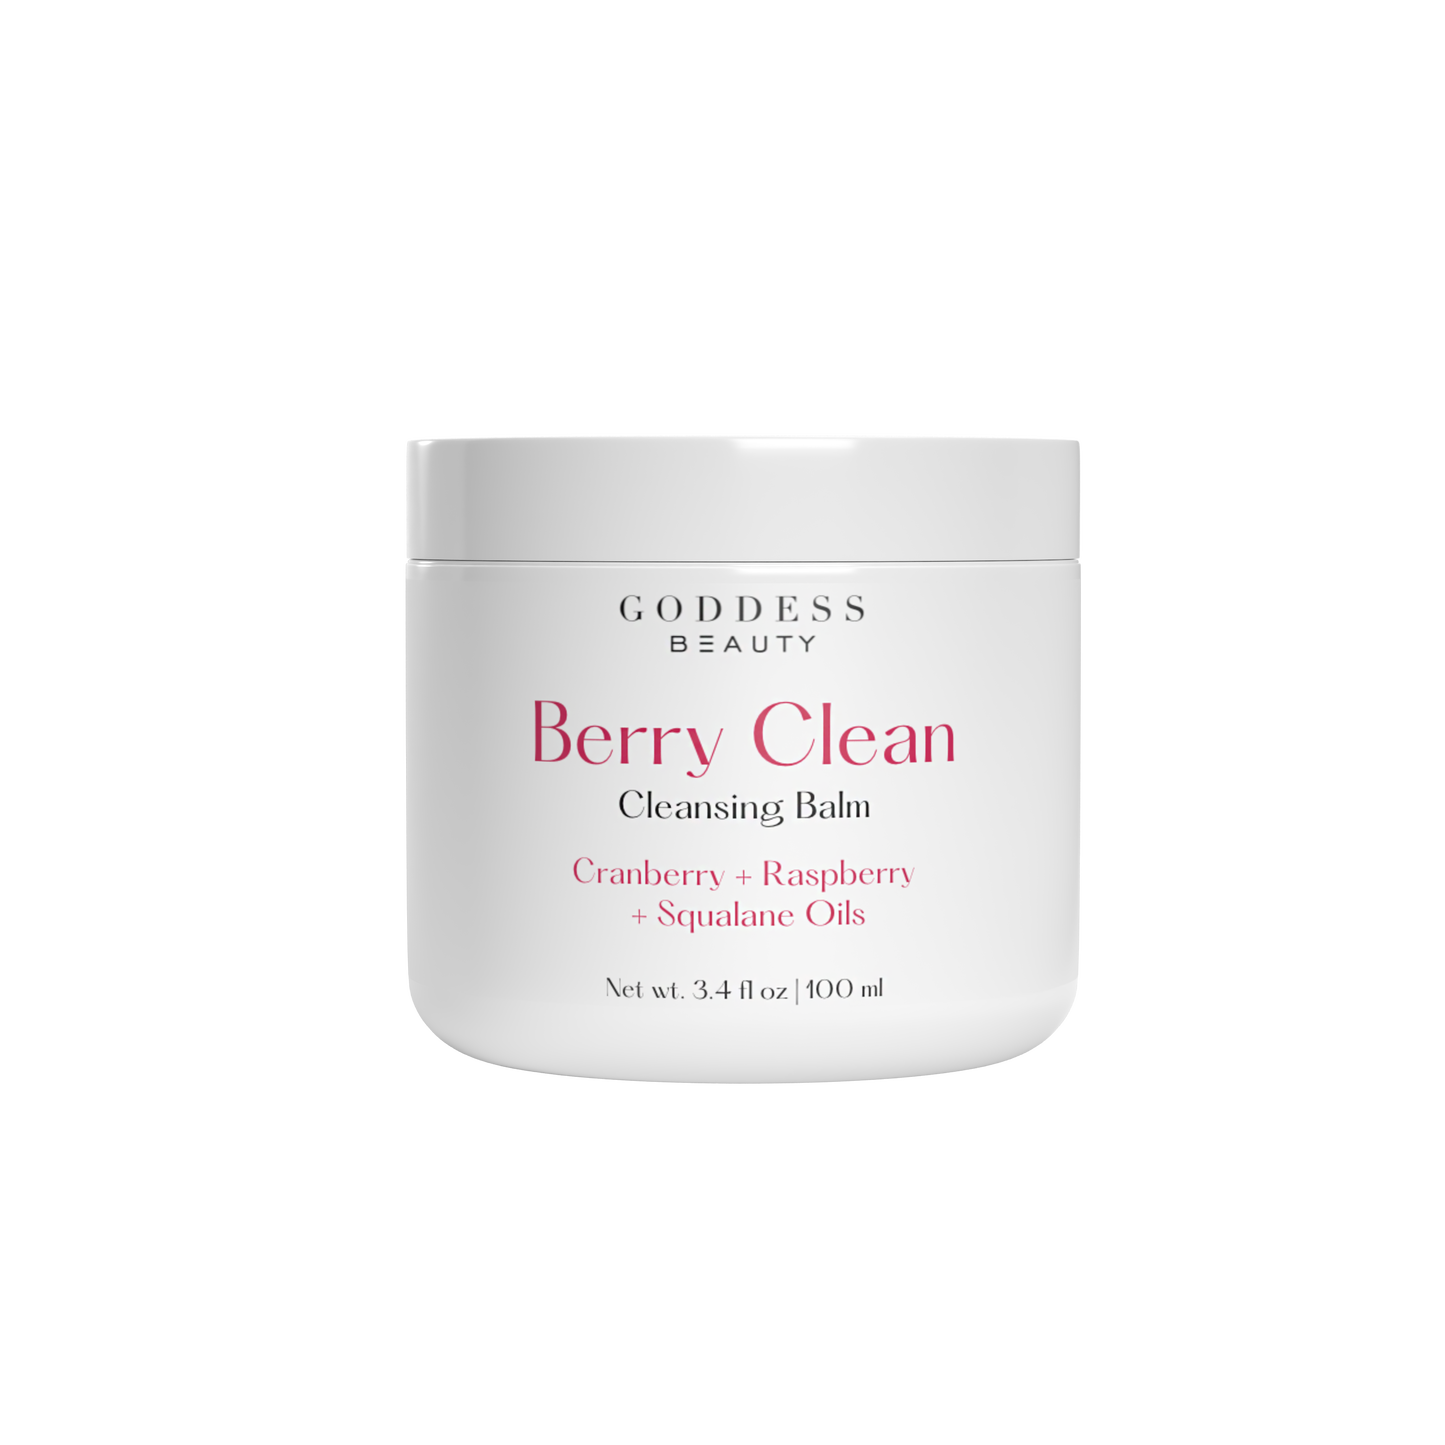 Berry Clean Cleansing Balm